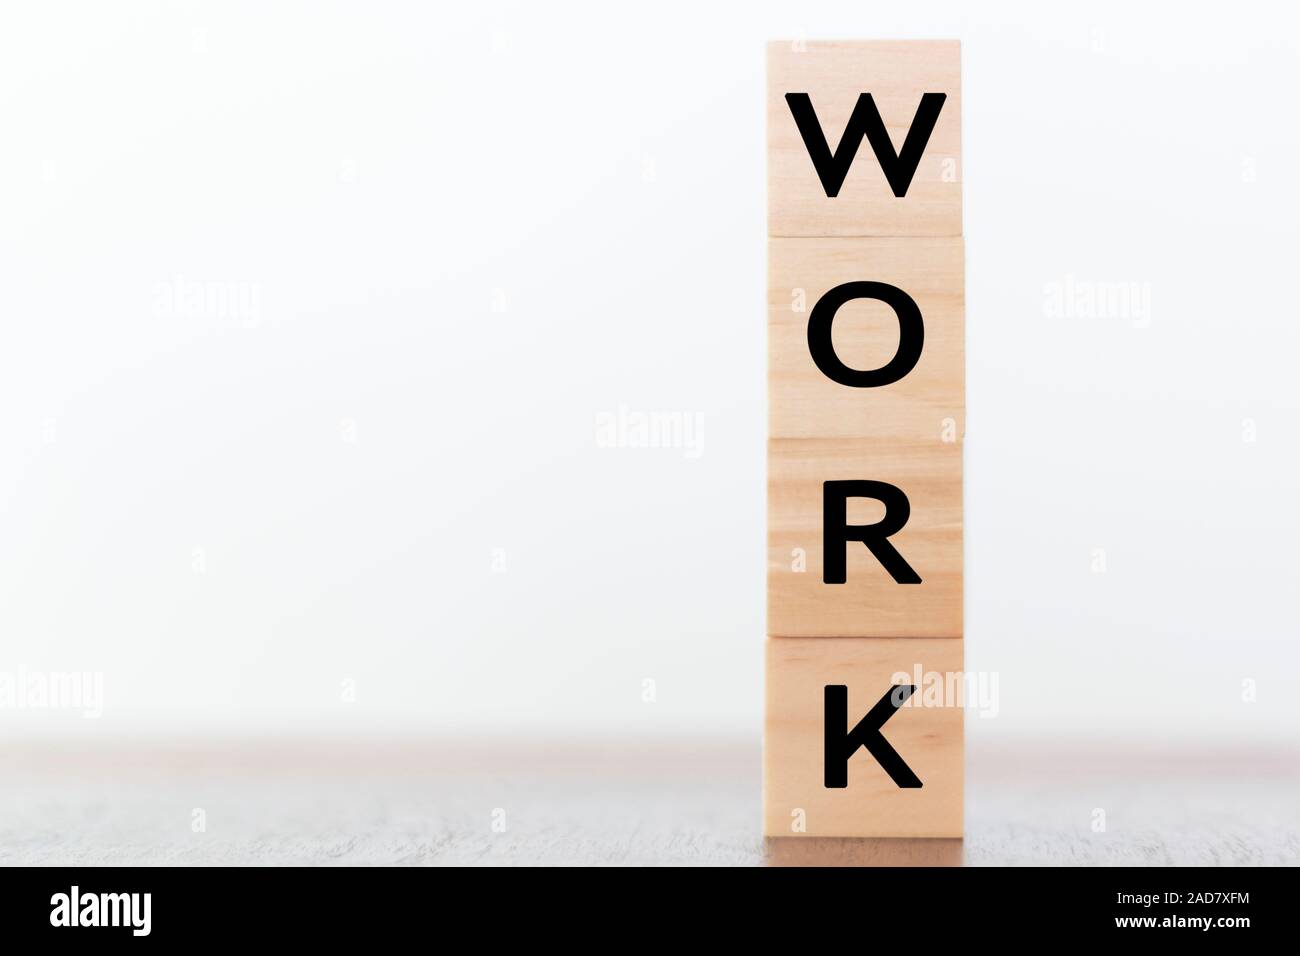 Work word written on wooden cubes with copy space Stock Photo